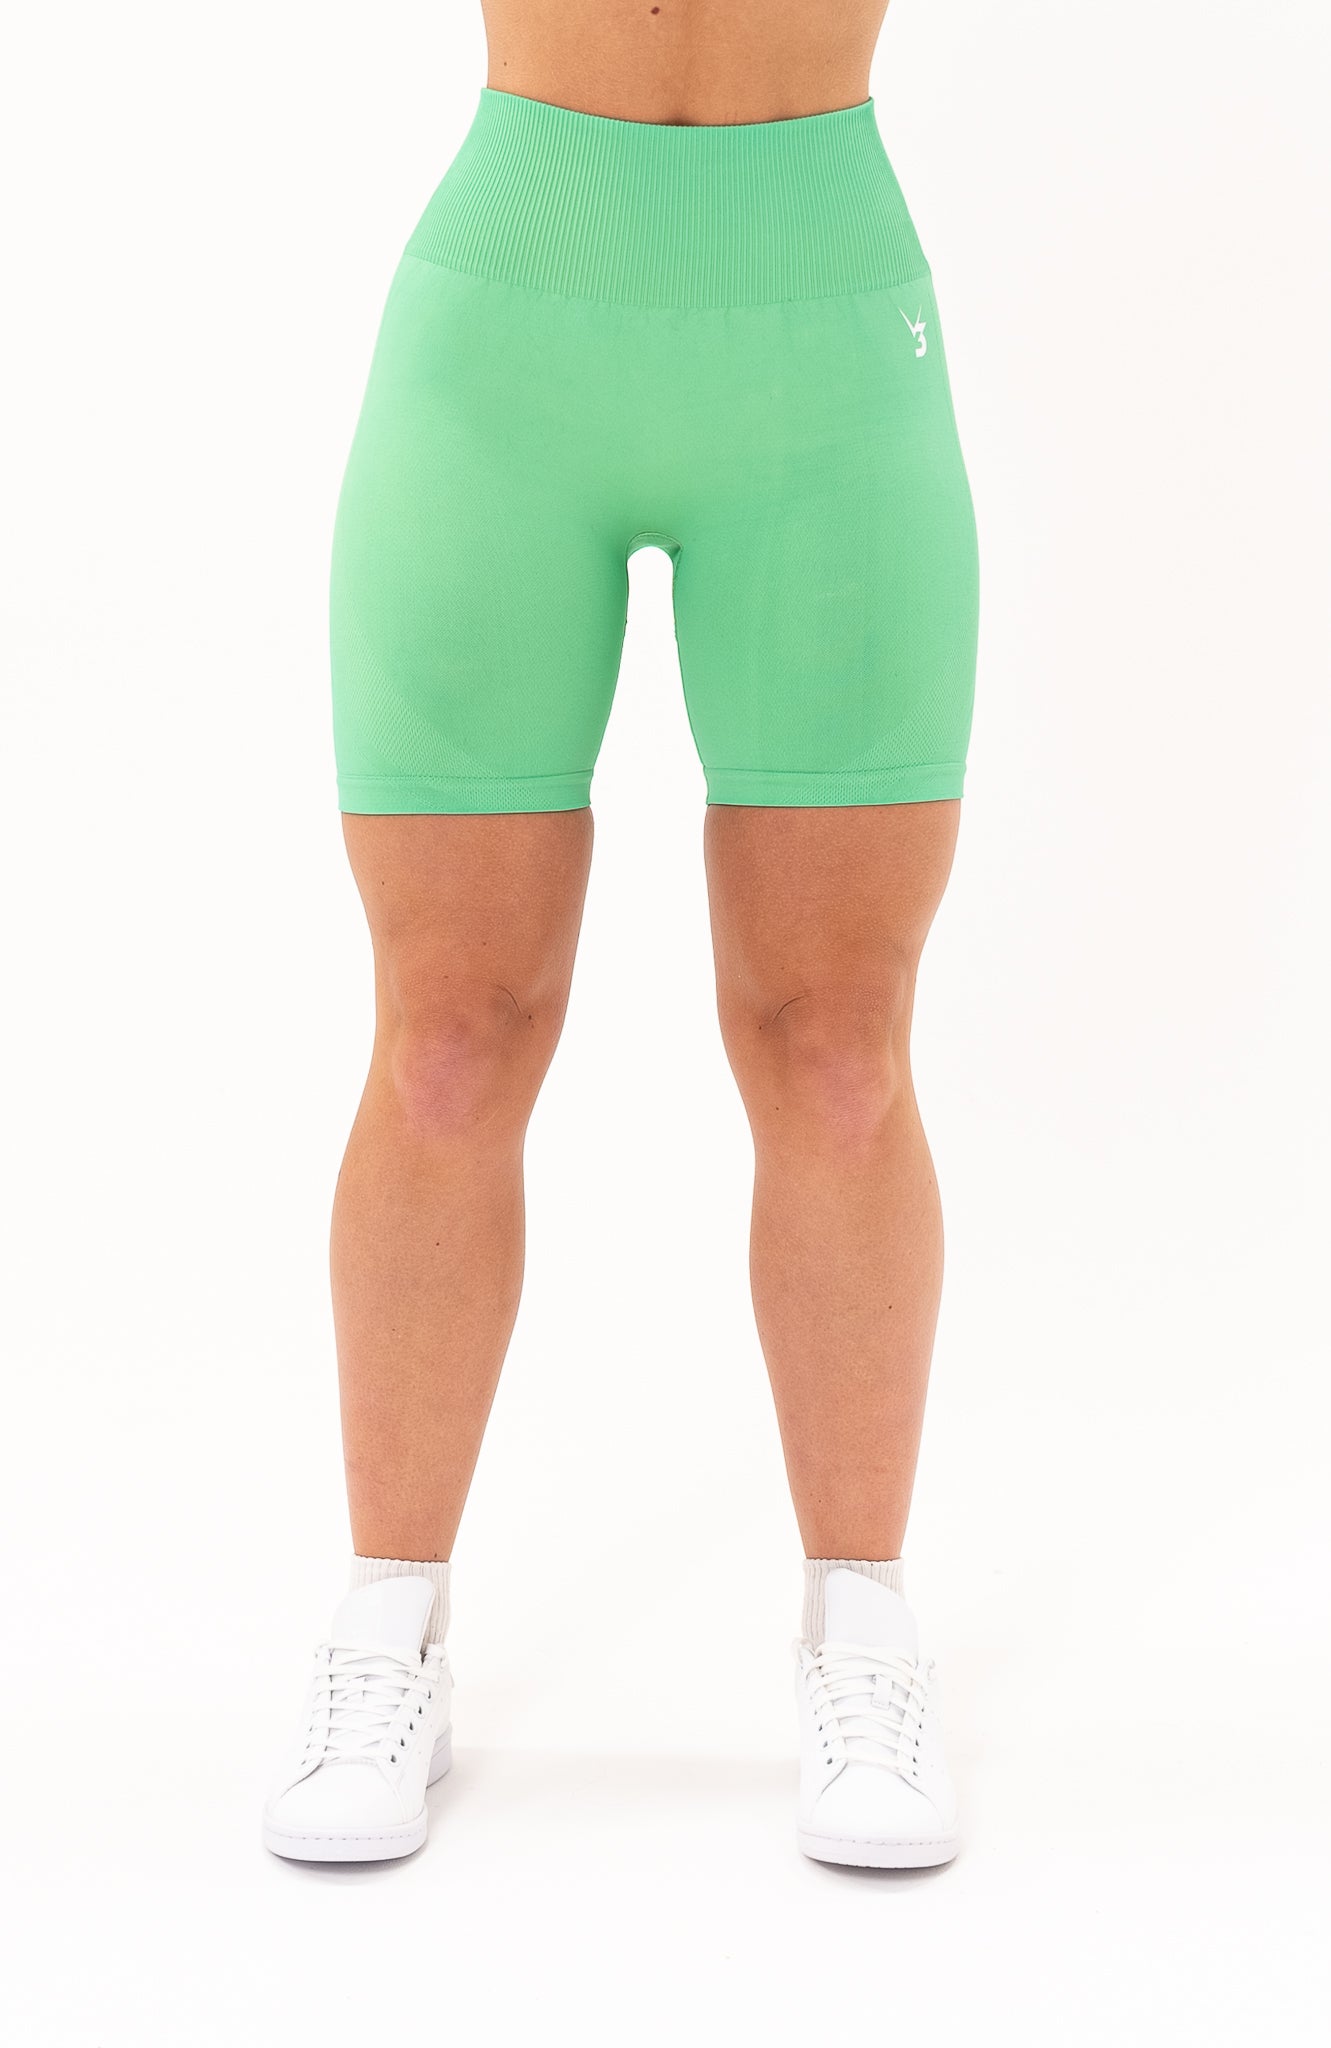 V3 Apparel Womens Limitless Seamless Workout Shorts - Mint - Gym, Running,  Yoga Tights